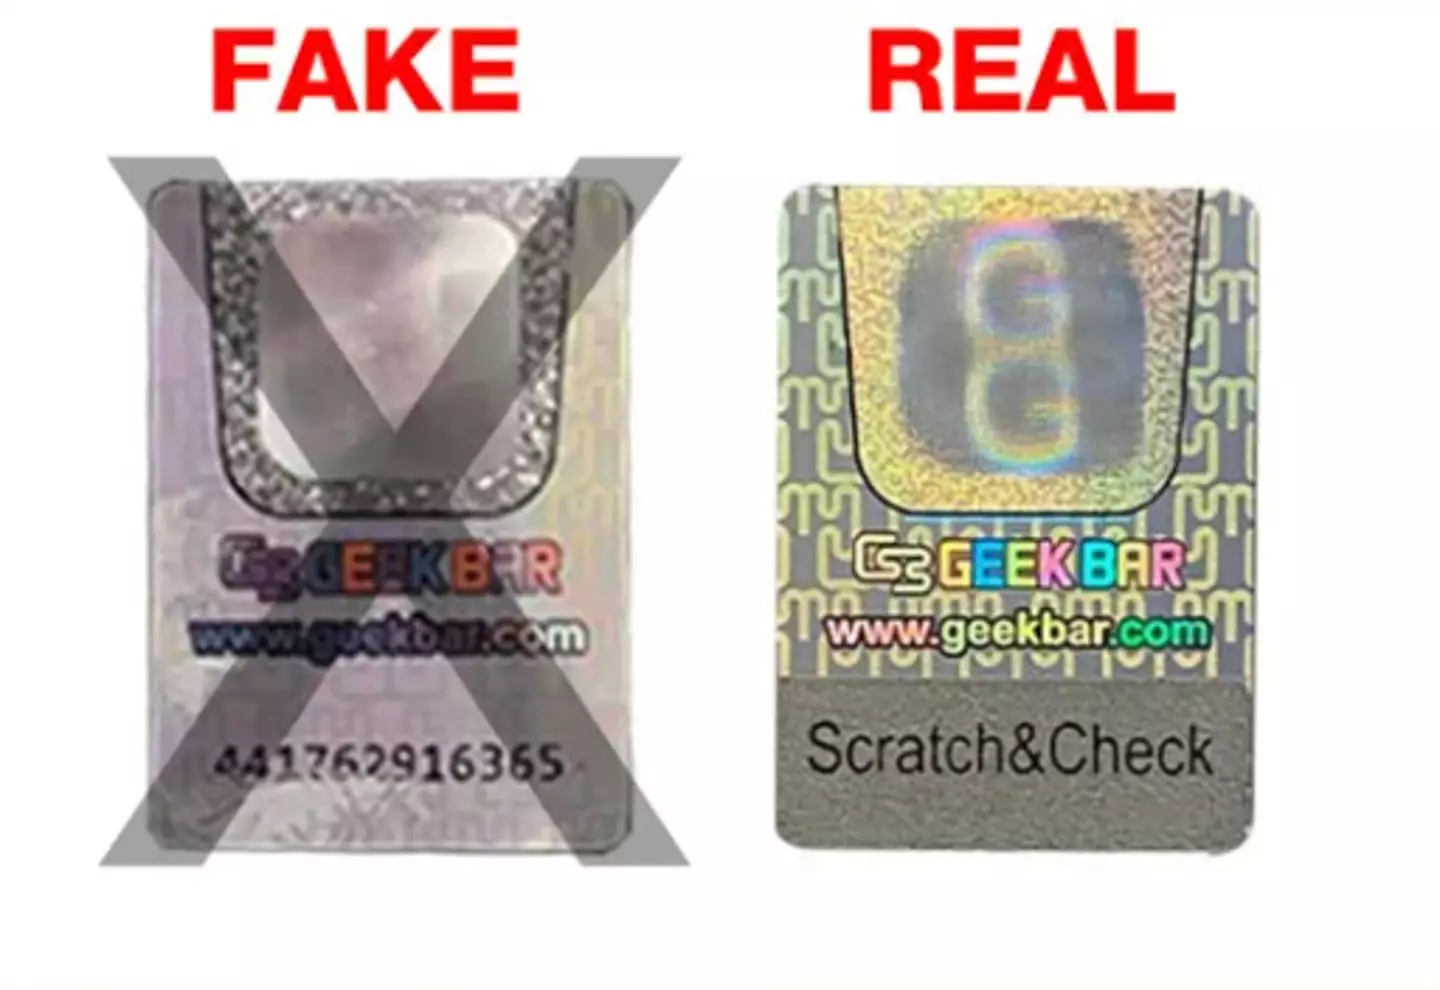 Fake vs real holographic stickers.